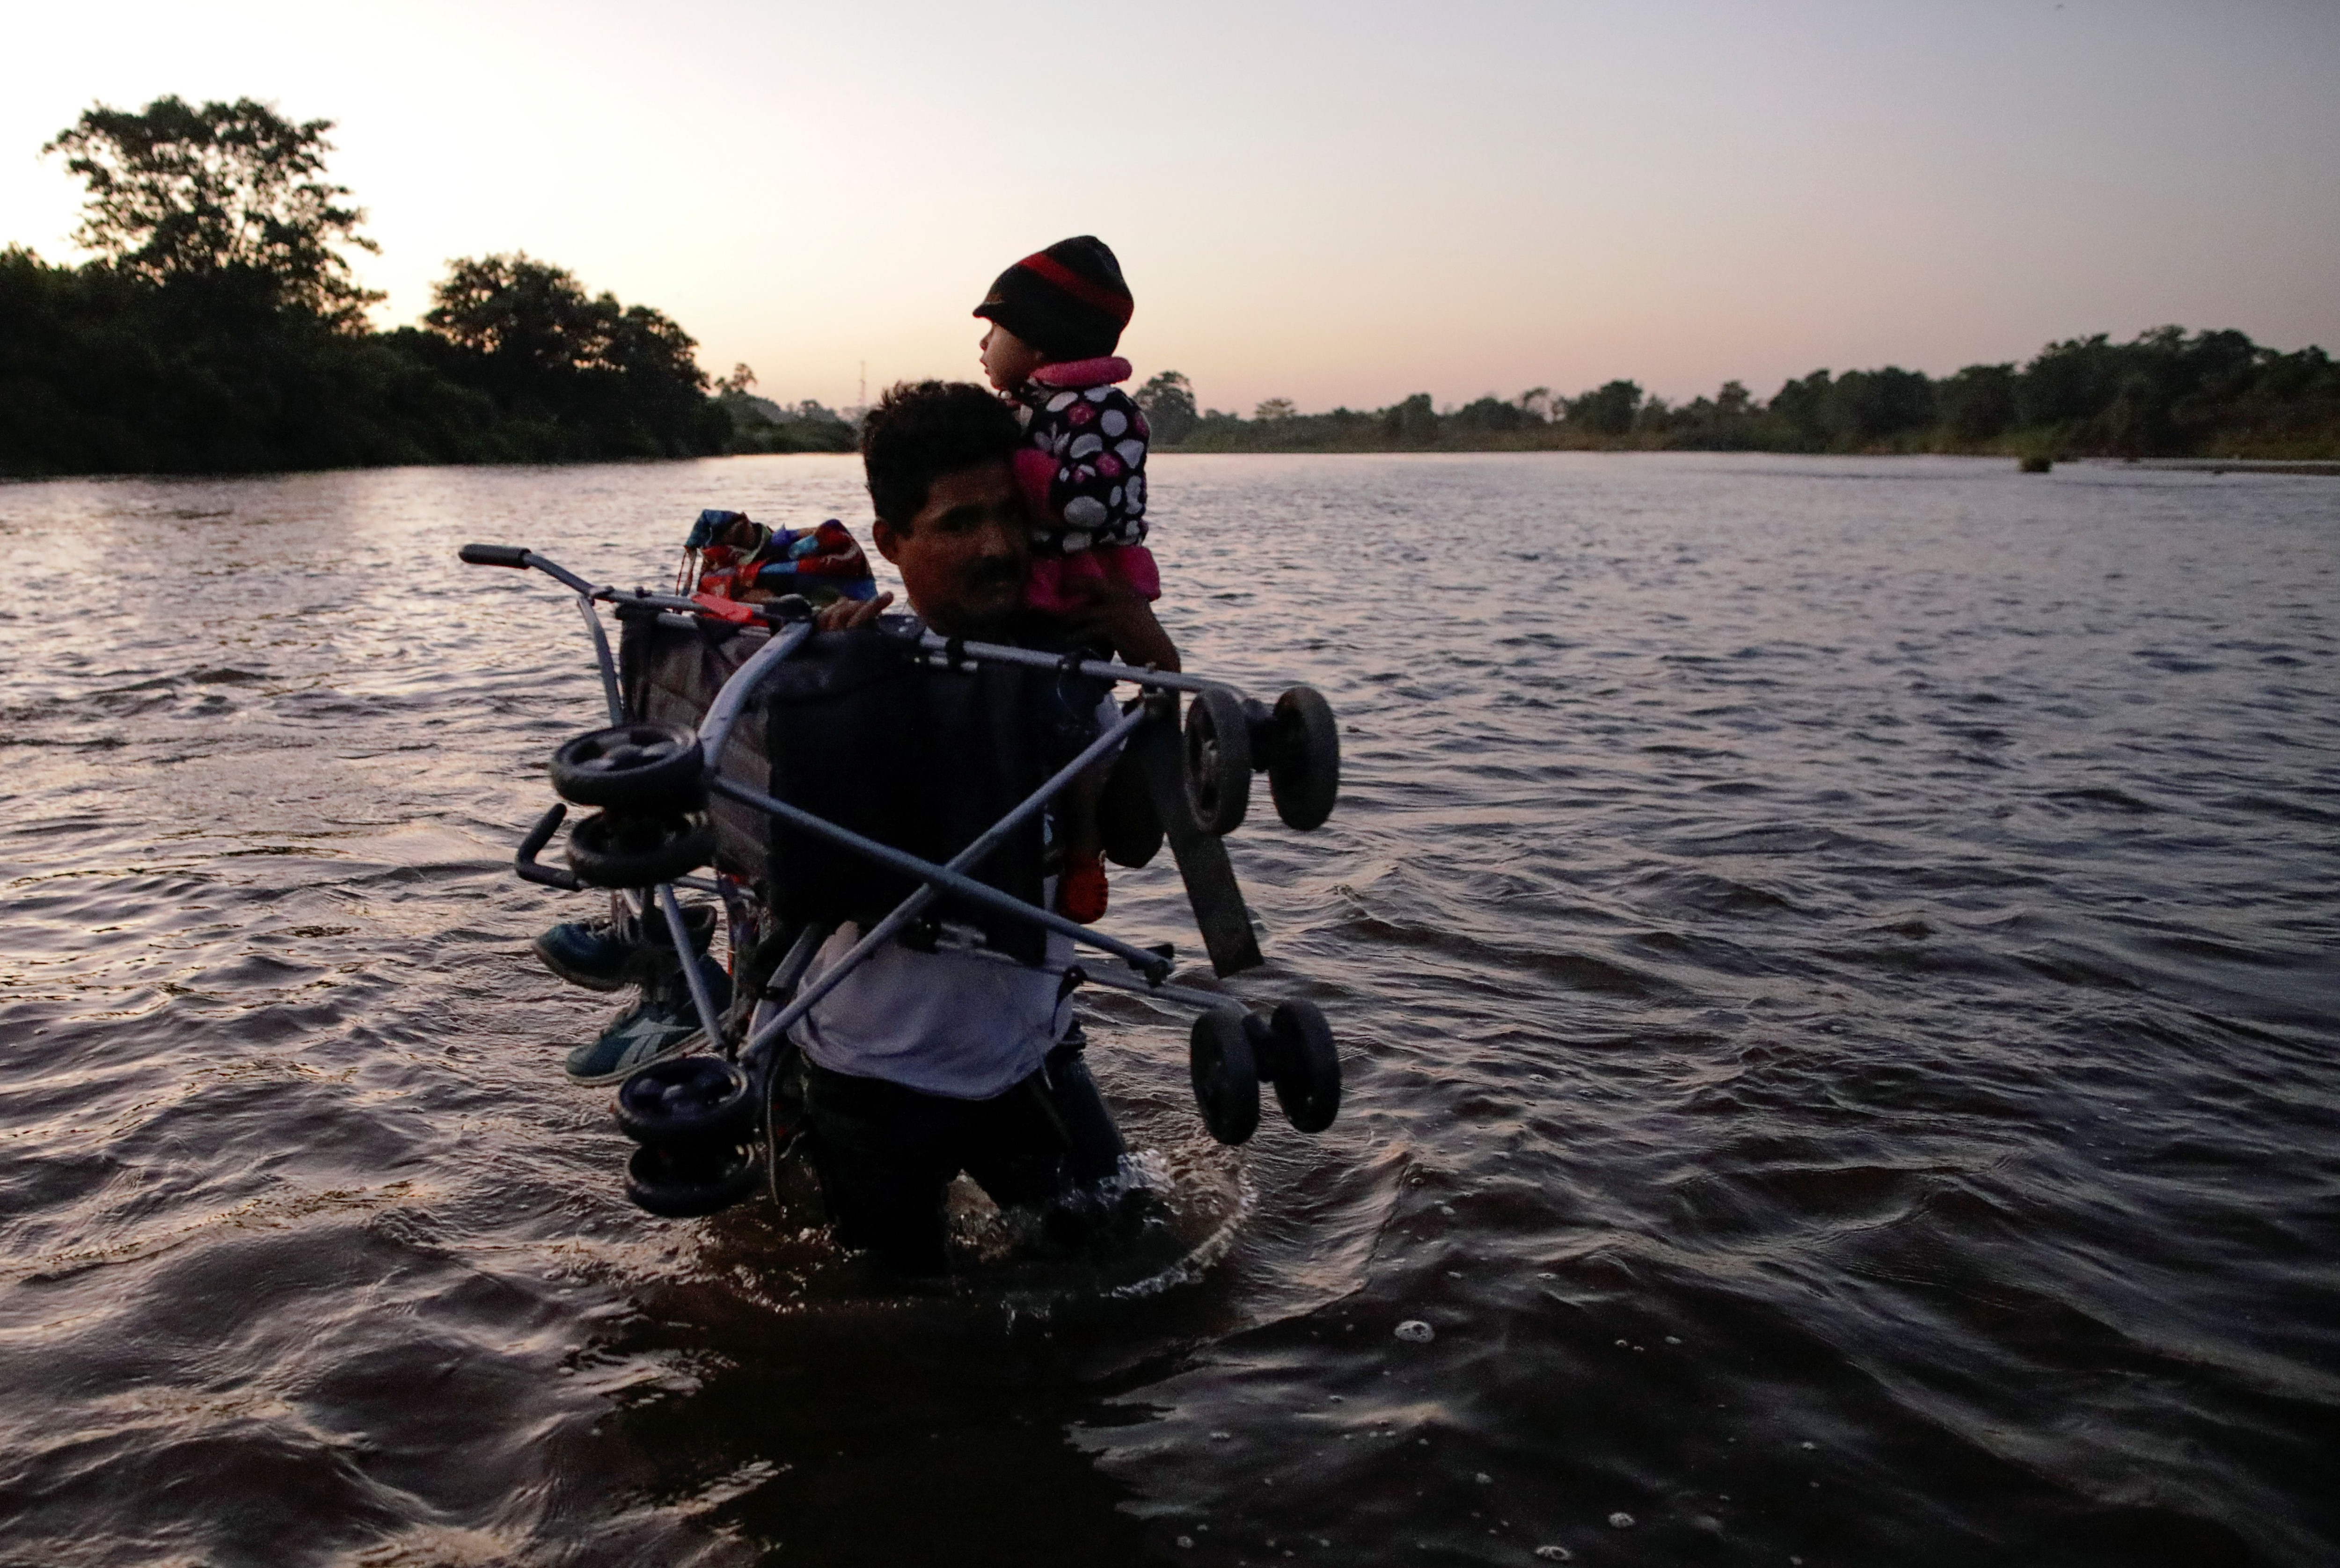 A man carries a baby and a stroller as other migrants, mainly from Central America, marching in a caravan cross the Suchiate river on the outskirts of Ciudad Hidalgo, Mexico January 23, 2020. REUTERS/Andres Martinez Casares